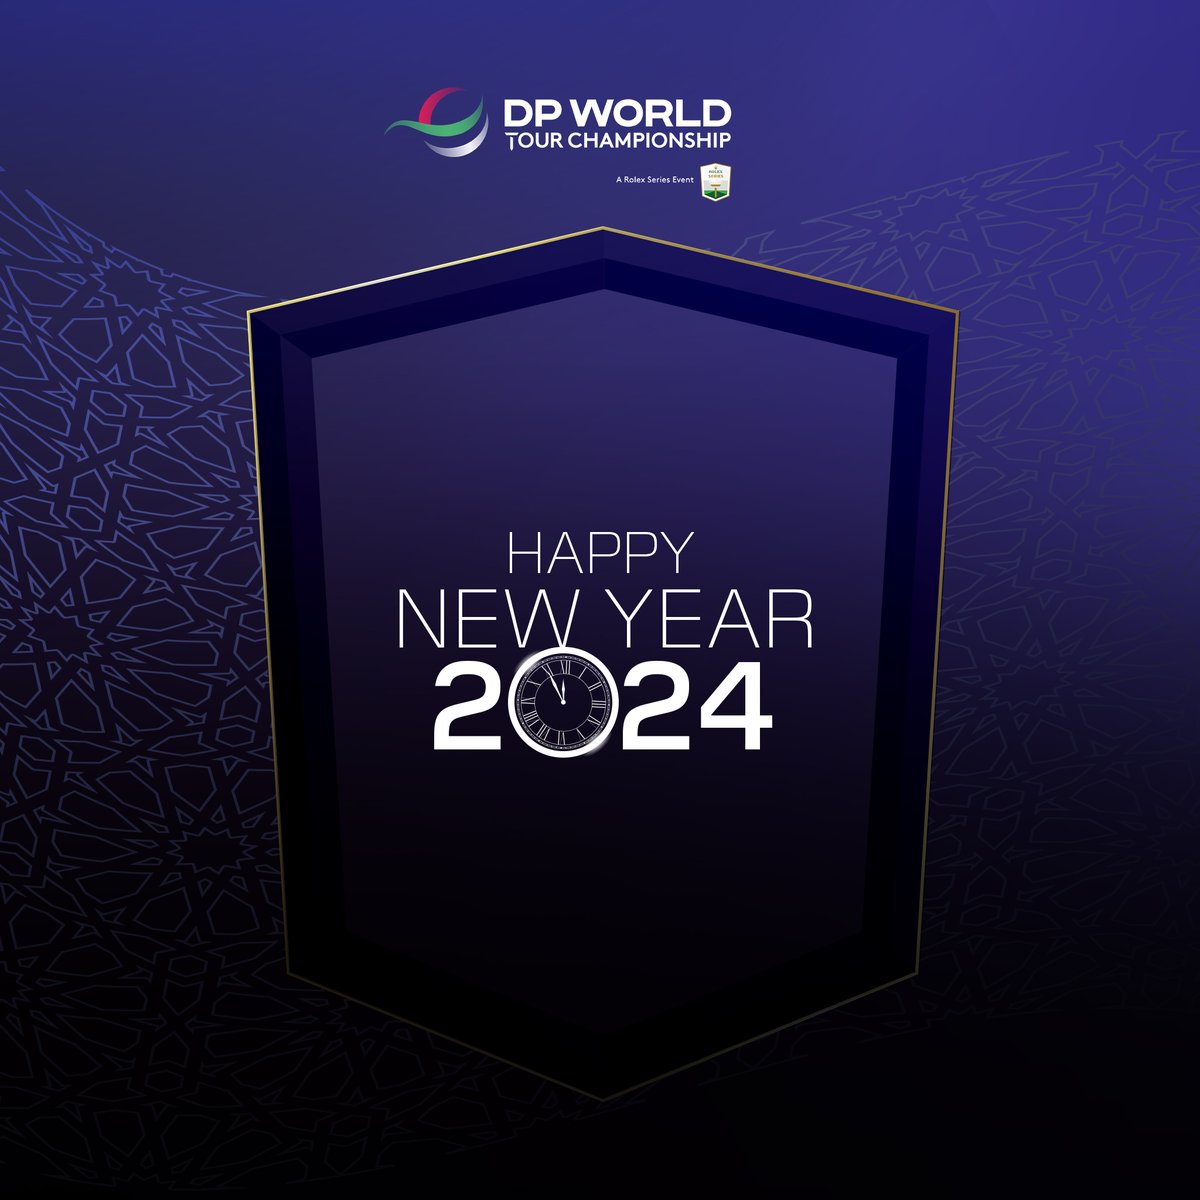 Wishing you all a happy and healthy New Year! #DPWTC #RolexSeries